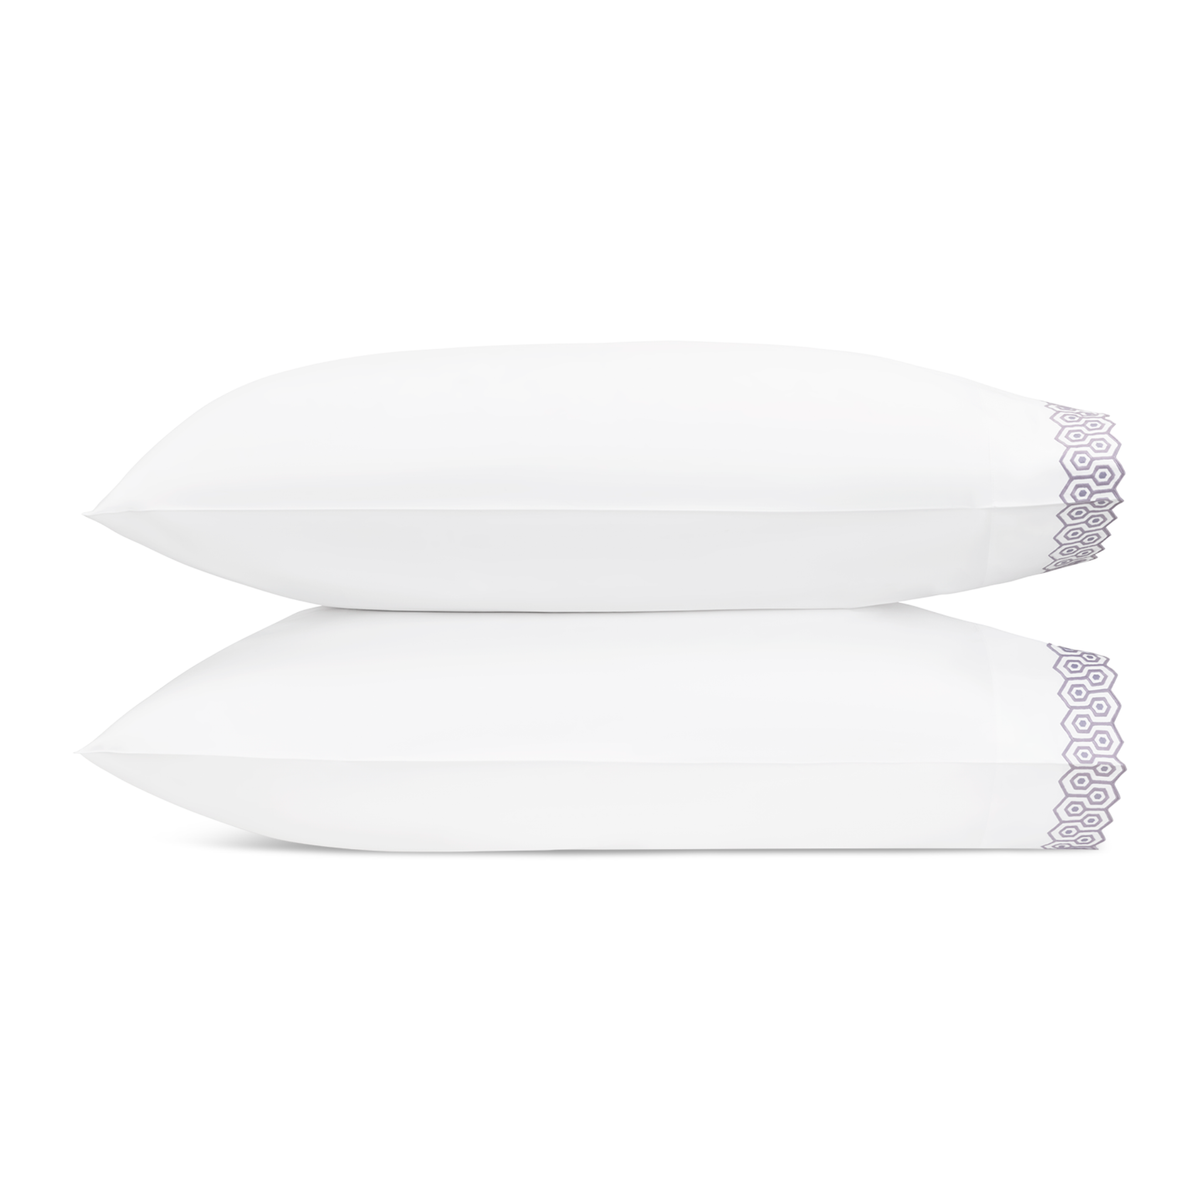 Pair of Pillowcases of Matouk Felix Bedding in Lilac Color